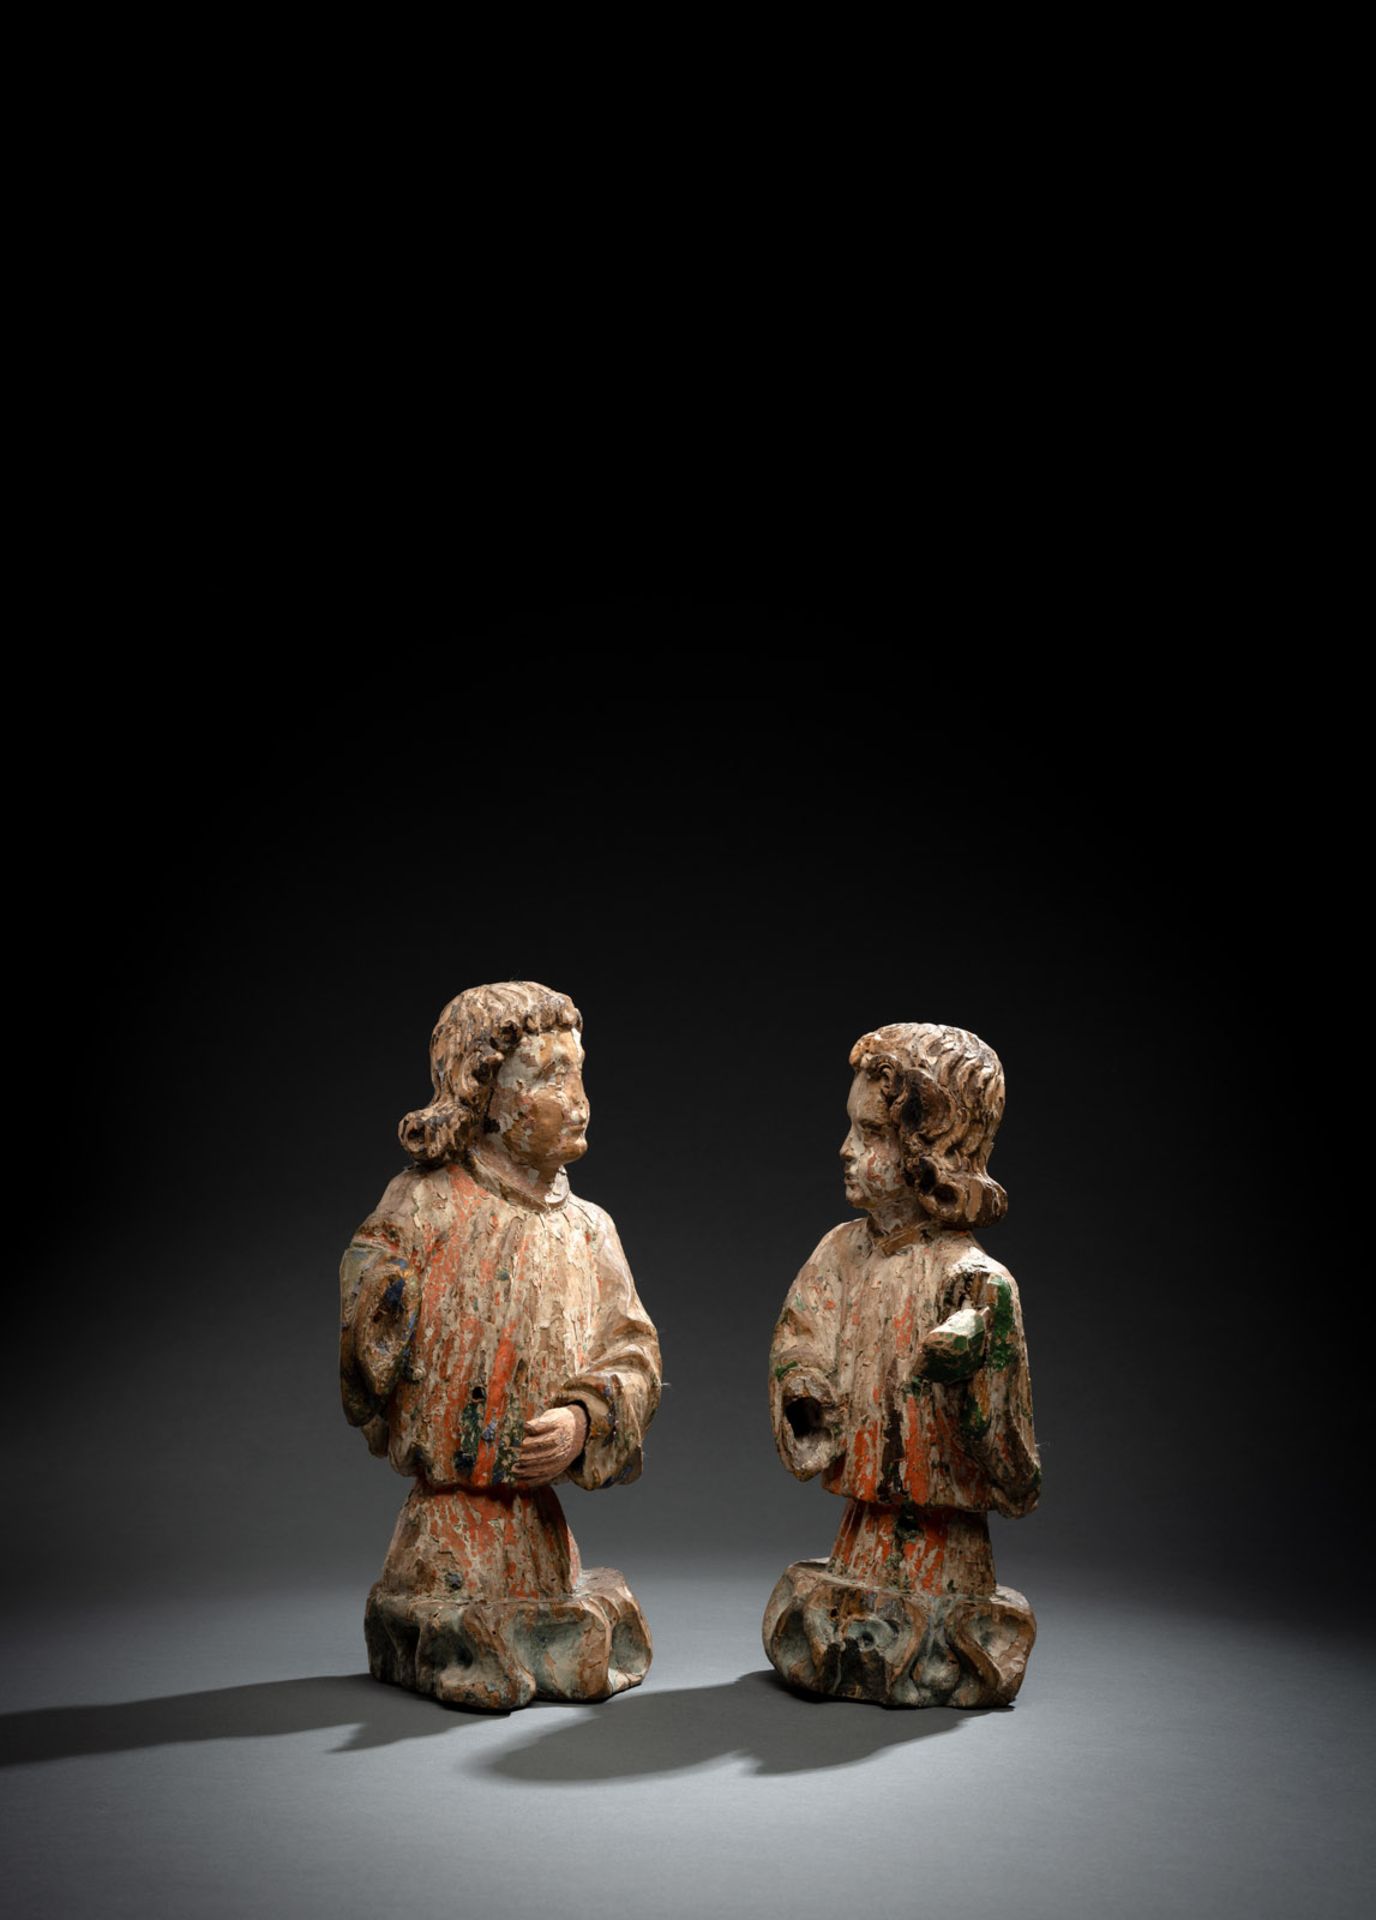 A PAIR OF PROBABLY FRANCONIAN GOTHIC ANGELS ON BANDS OF CLOUDS - Image 3 of 3